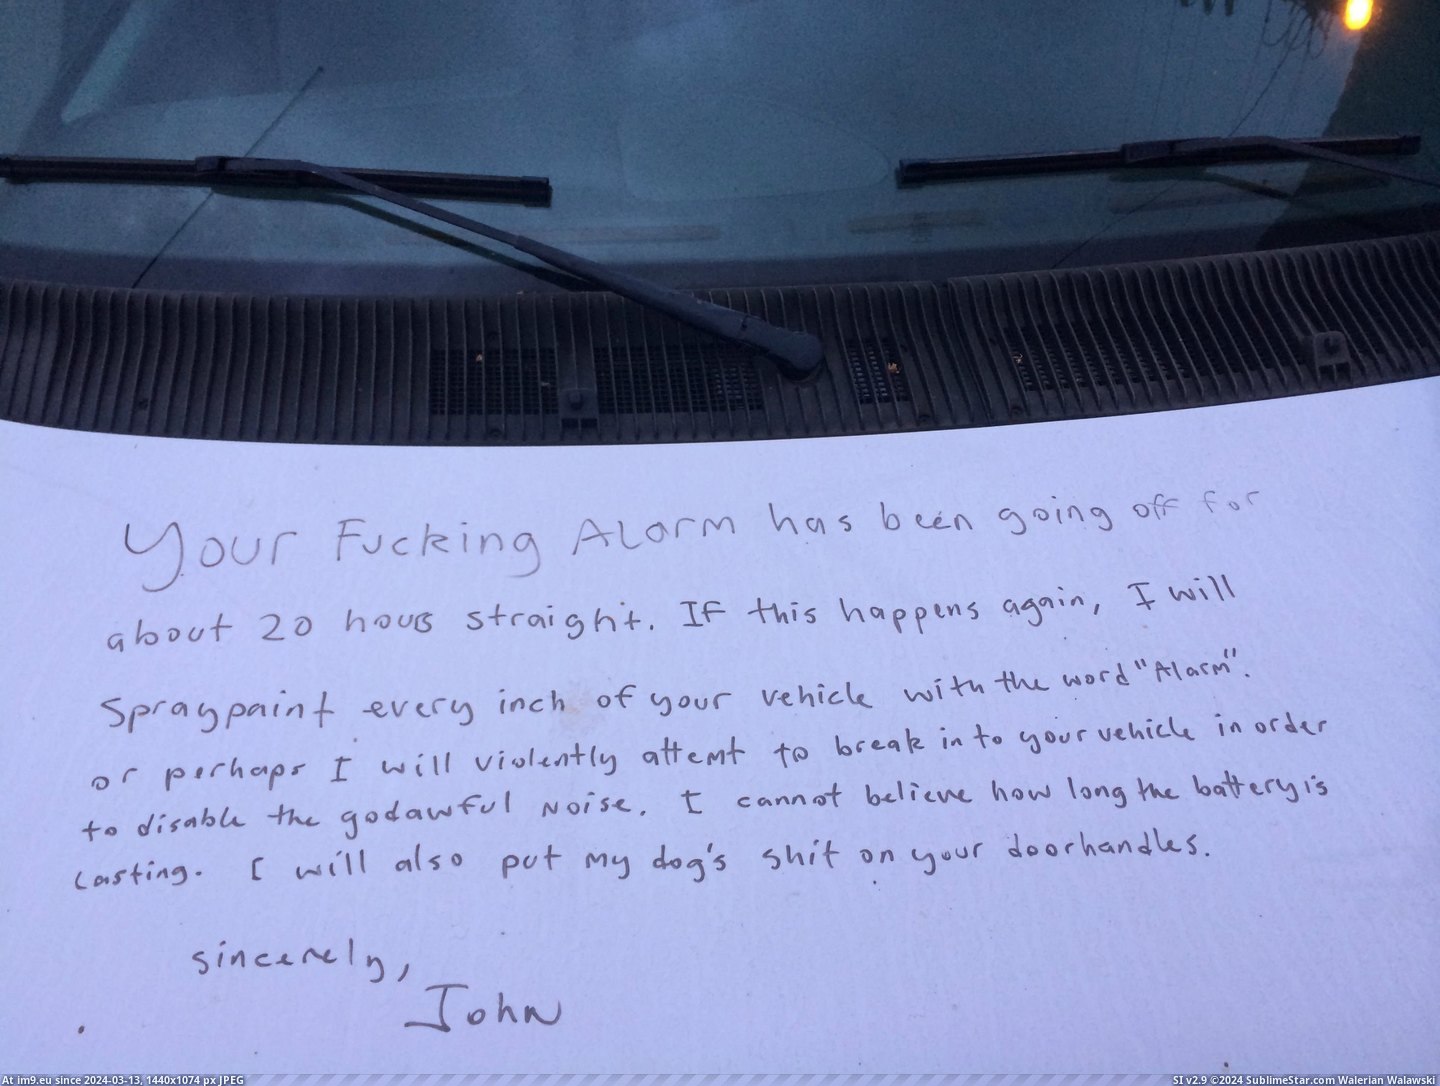 #Funny #Friend #Van #Overnight #Shift #Marker #Permanent #Find #Message #Written [Funny] My friend came back from an overnight shift to find this message written in permanent marker on his van. Pic. (Image of album My r/FUNNY favs))